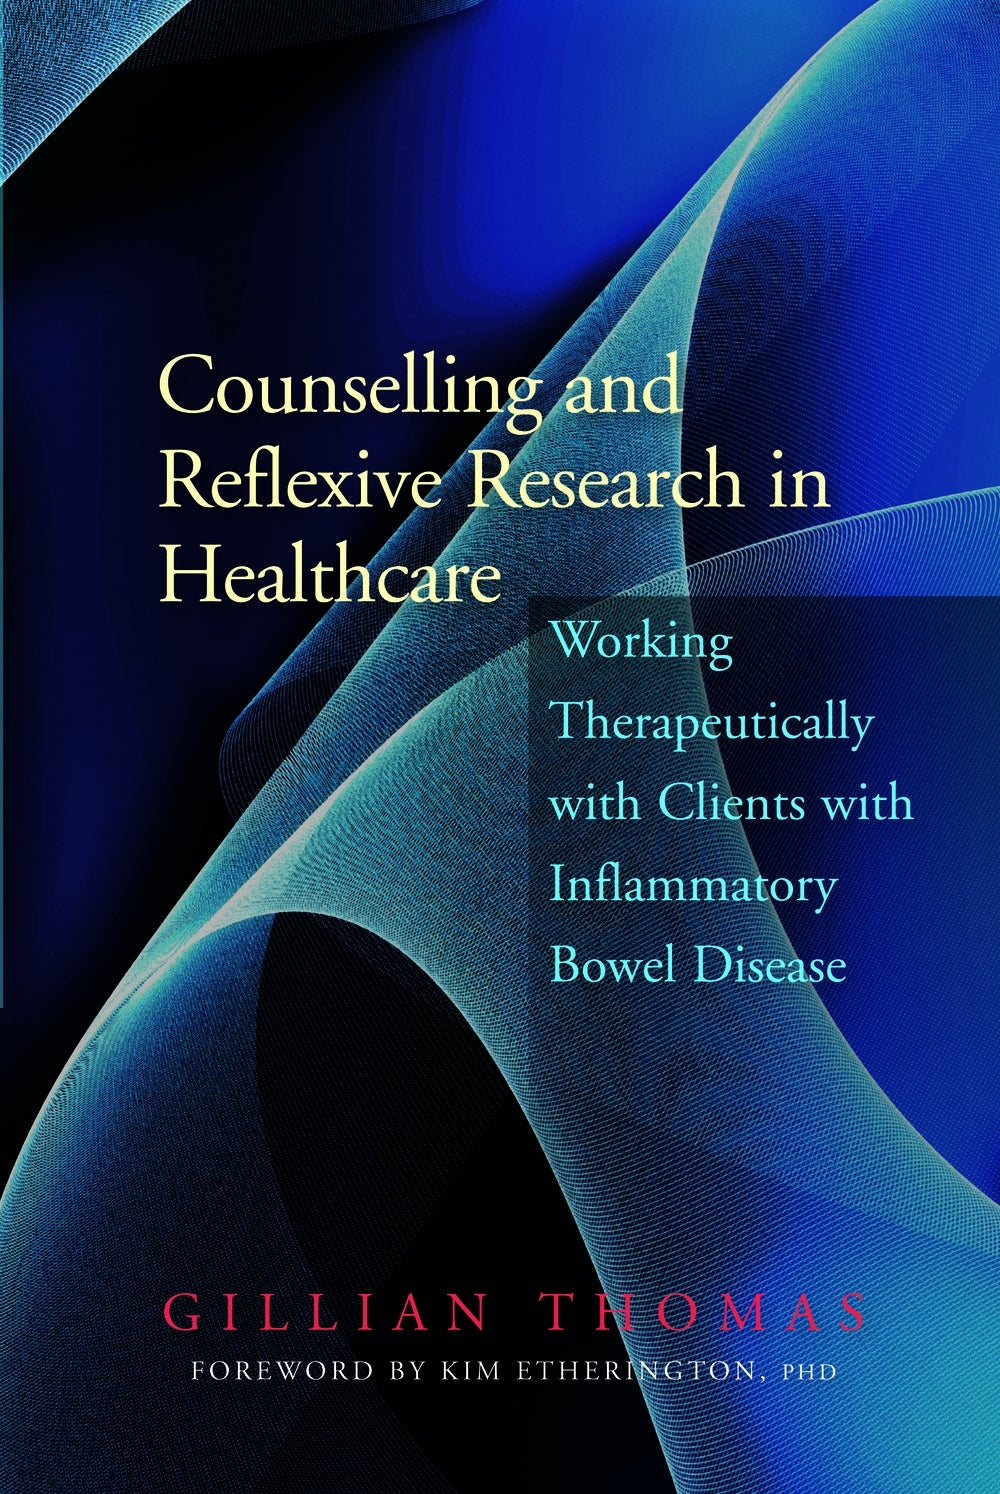 Counselling and Reflexive Research in Healthcare by Gillian Thomas